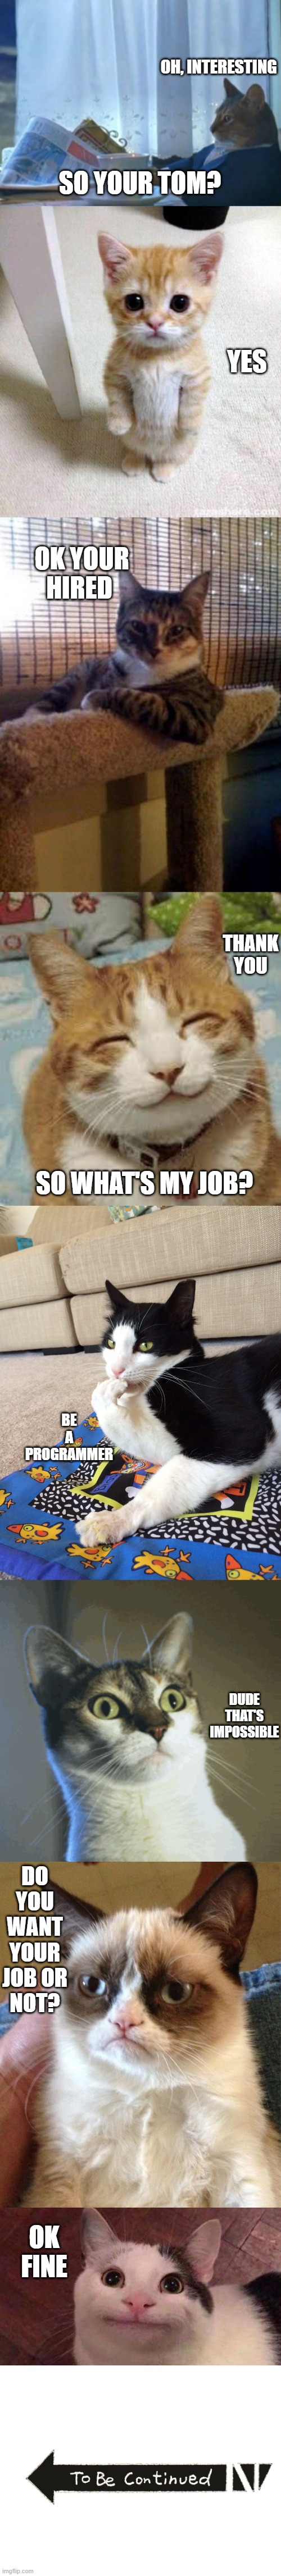 cat get hired | OH, INTERESTING; SO YOUR TOM? YES; OK YOUR HIRED; THANK YOU; SO WHAT'S MY JOB? BE A PROGRAMMER; DUDE THAT'S IMPOSSIBLE; DO YOU WANT YOUR JOB OR NOT? OK FINE | image tagged in memes,story meme,programmer | made w/ Imgflip meme maker